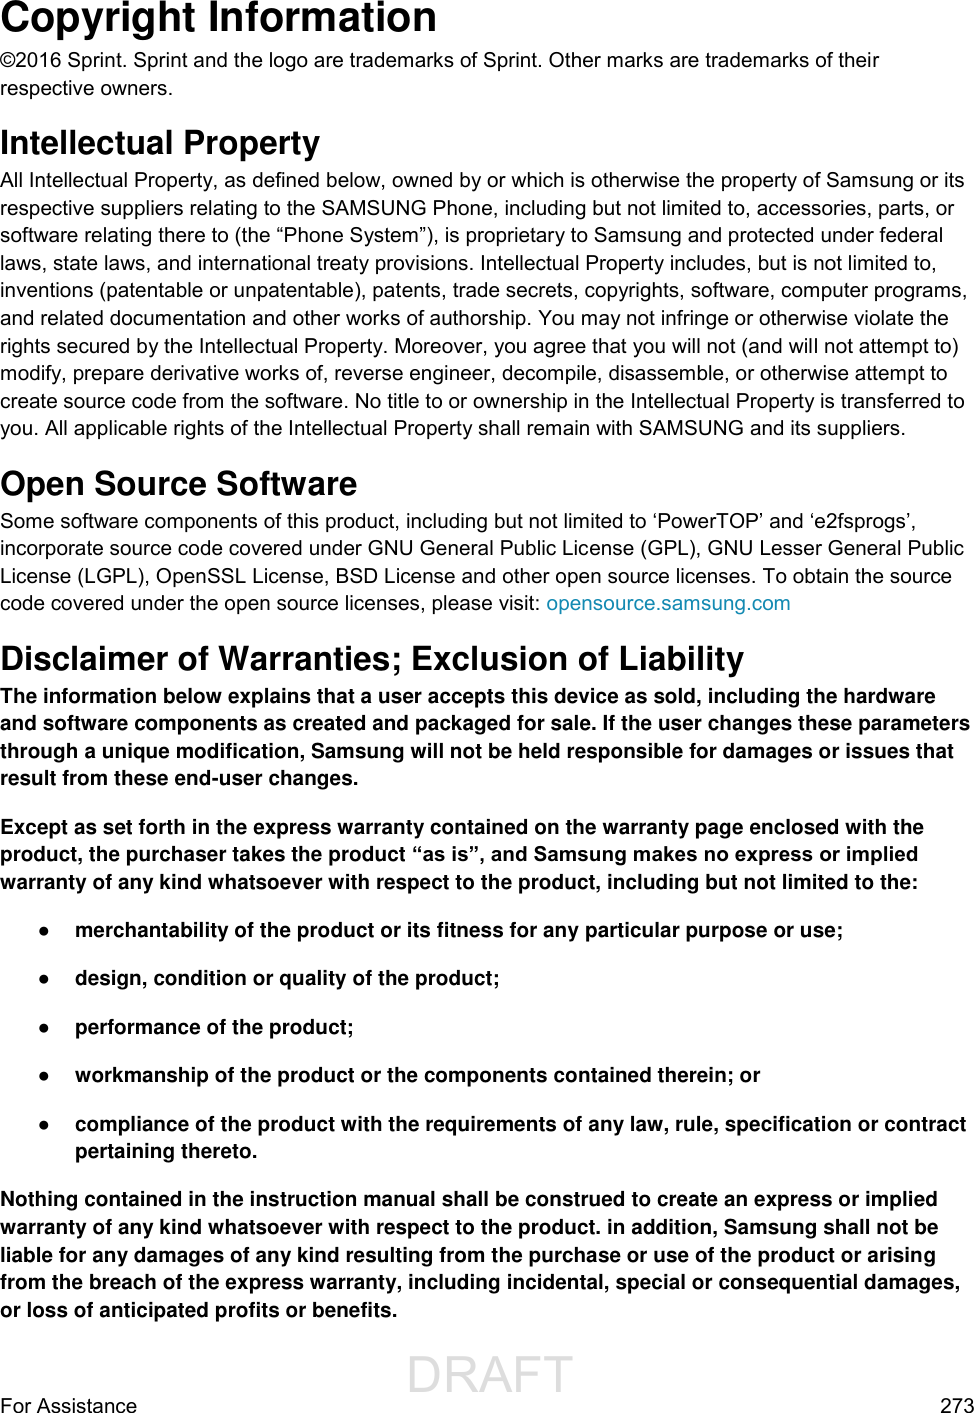                  DRAFT FOR INTERNAL USE ONLYFor Assistance  273 Copyright Information ©2016 Sprint. Sprint and the logo are trademarks of Sprint. Other marks are trademarks of their respective owners. Intellectual Property All Intellectual Property, as defined below, owned by or which is otherwise the property of Samsung or its respective suppliers relating to the SAMSUNG Phone, including but not limited to, accessories, parts, or software relating there to (the “Phone System”), is proprietary to Samsung and protected under federal laws, state laws, and international treaty provisions. Intellectual Property includes, but is not limited to, inventions (patentable or unpatentable), patents, trade secrets, copyrights, software, computer programs, and related documentation and other works of authorship. You may not infringe or otherwise violate the rights secured by the Intellectual Property. Moreover, you agree that you will not (and will not attempt to) modify, prepare derivative works of, reverse engineer, decompile, disassemble, or otherwise attempt to create source code from the software. No title to or ownership in the Intellectual Property is transferred to you. All applicable rights of the Intellectual Property shall remain with SAMSUNG and its suppliers. Open Source Software Some software components of this product, including but not limited to ‘PowerTOP’ and ‘e2fsprogs’, incorporate source code covered under GNU General Public License (GPL), GNU Lesser General Public License (LGPL), OpenSSL License, BSD License and other open source licenses. To obtain the source code covered under the open source licenses, please visit: opensource.samsung.com Disclaimer of Warranties; Exclusion of Liability The information below explains that a user accepts this device as sold, including the hardware and software components as created and packaged for sale. If the user changes these parameters through a unique modification, Samsung will not be held responsible for damages or issues that result from these end-user changes. Except as set forth in the express warranty contained on the warranty page enclosed with the product, the purchaser takes the product “as is”, and Samsung makes no express or implied warranty of any kind whatsoever with respect to the product, including but not limited to the:  ● merchantability of the product or its fitness for any particular purpose or use;  ● design, condition or quality of the product;  ● performance of the product;  ● workmanship of the product or the components contained therein; or  ● compliance of the product with the requirements of any law, rule, specification or contract pertaining thereto.  Nothing contained in the instruction manual shall be construed to create an express or implied warranty of any kind whatsoever with respect to the product. in addition, Samsung shall not be liable for any damages of any kind resulting from the purchase or use of the product or arising from the breach of the express warranty, including incidental, special or consequential damages, or loss of anticipated profits or benefits. 